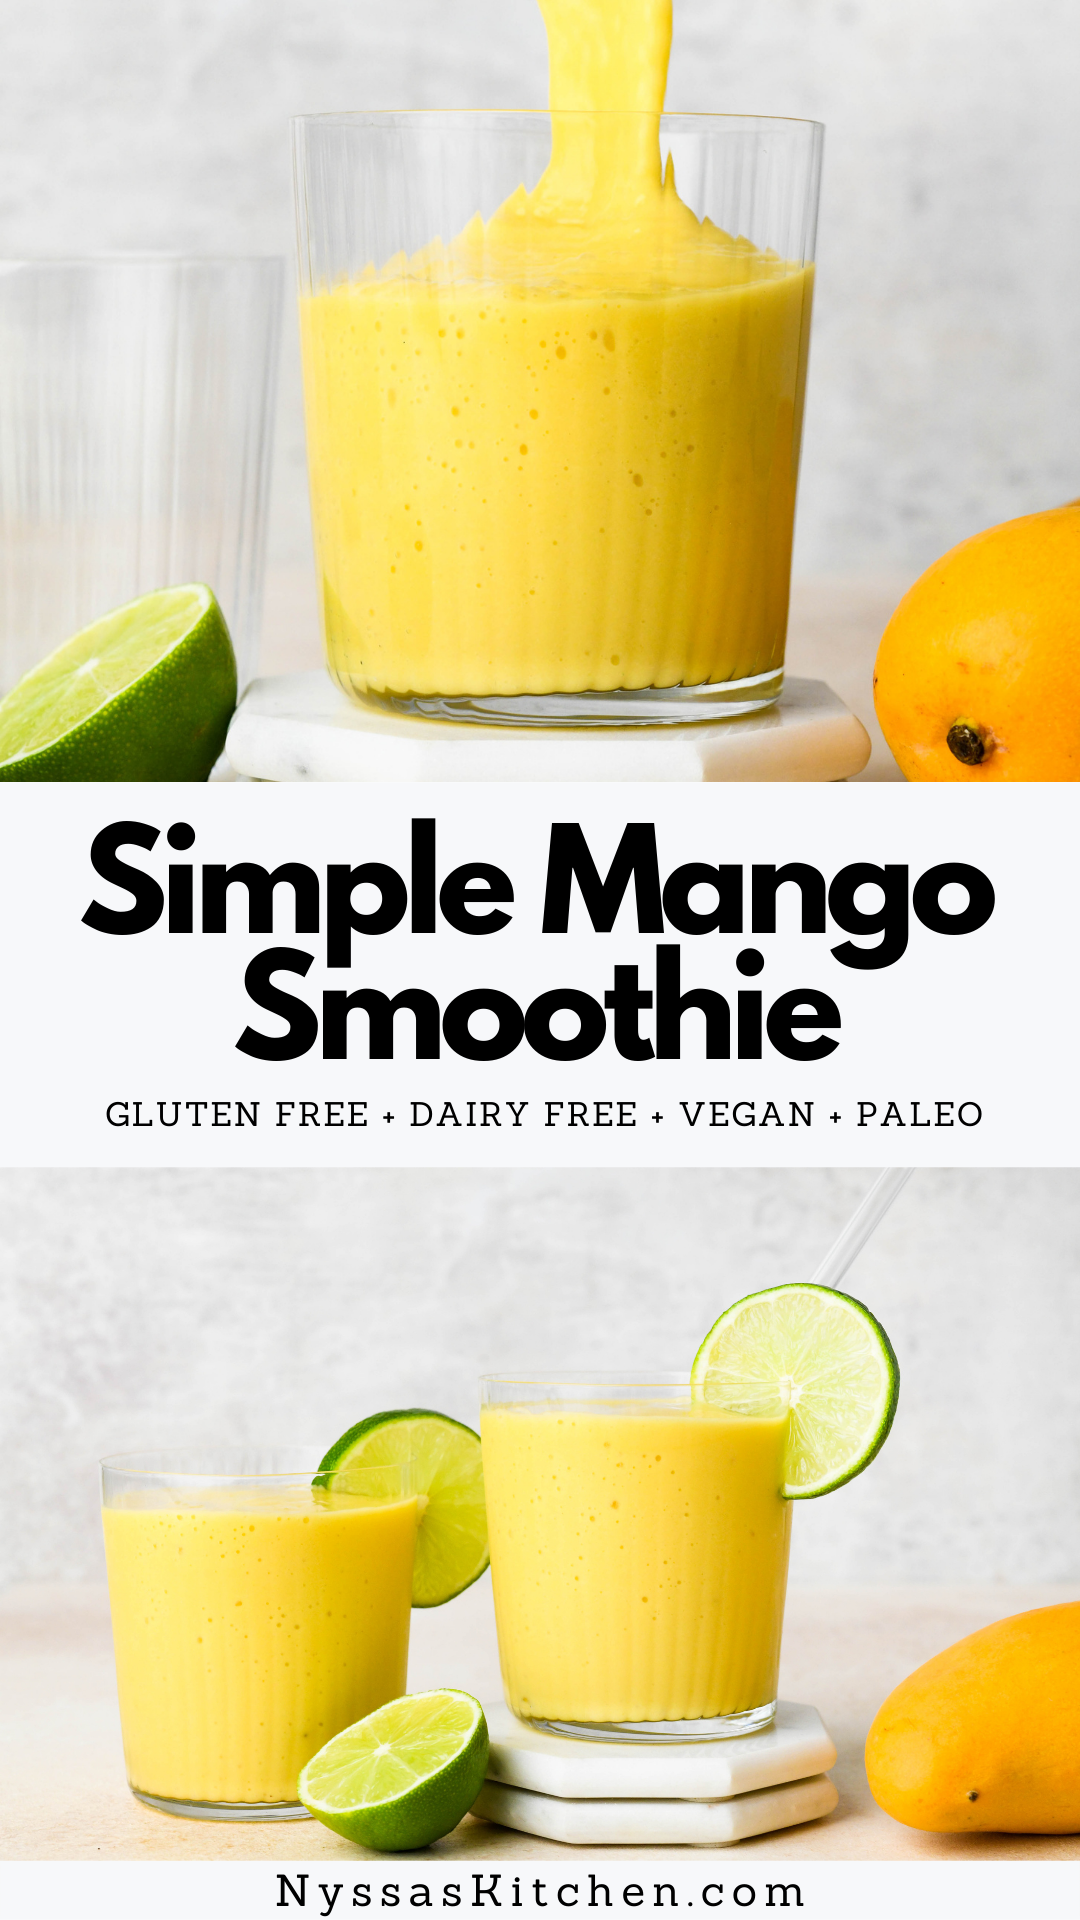 This simple mango smoothie is creamy and refreshing and made with only 5 ingredients and no yogurt! It's a great addition to any breakfast spread and the perfect afternoon snack. Made with fresh or frozen mango, banana (I include an option to make without banana, too!), lime juice, and dairy free milk. Gluten free, dairy free, vegan, and paleo.